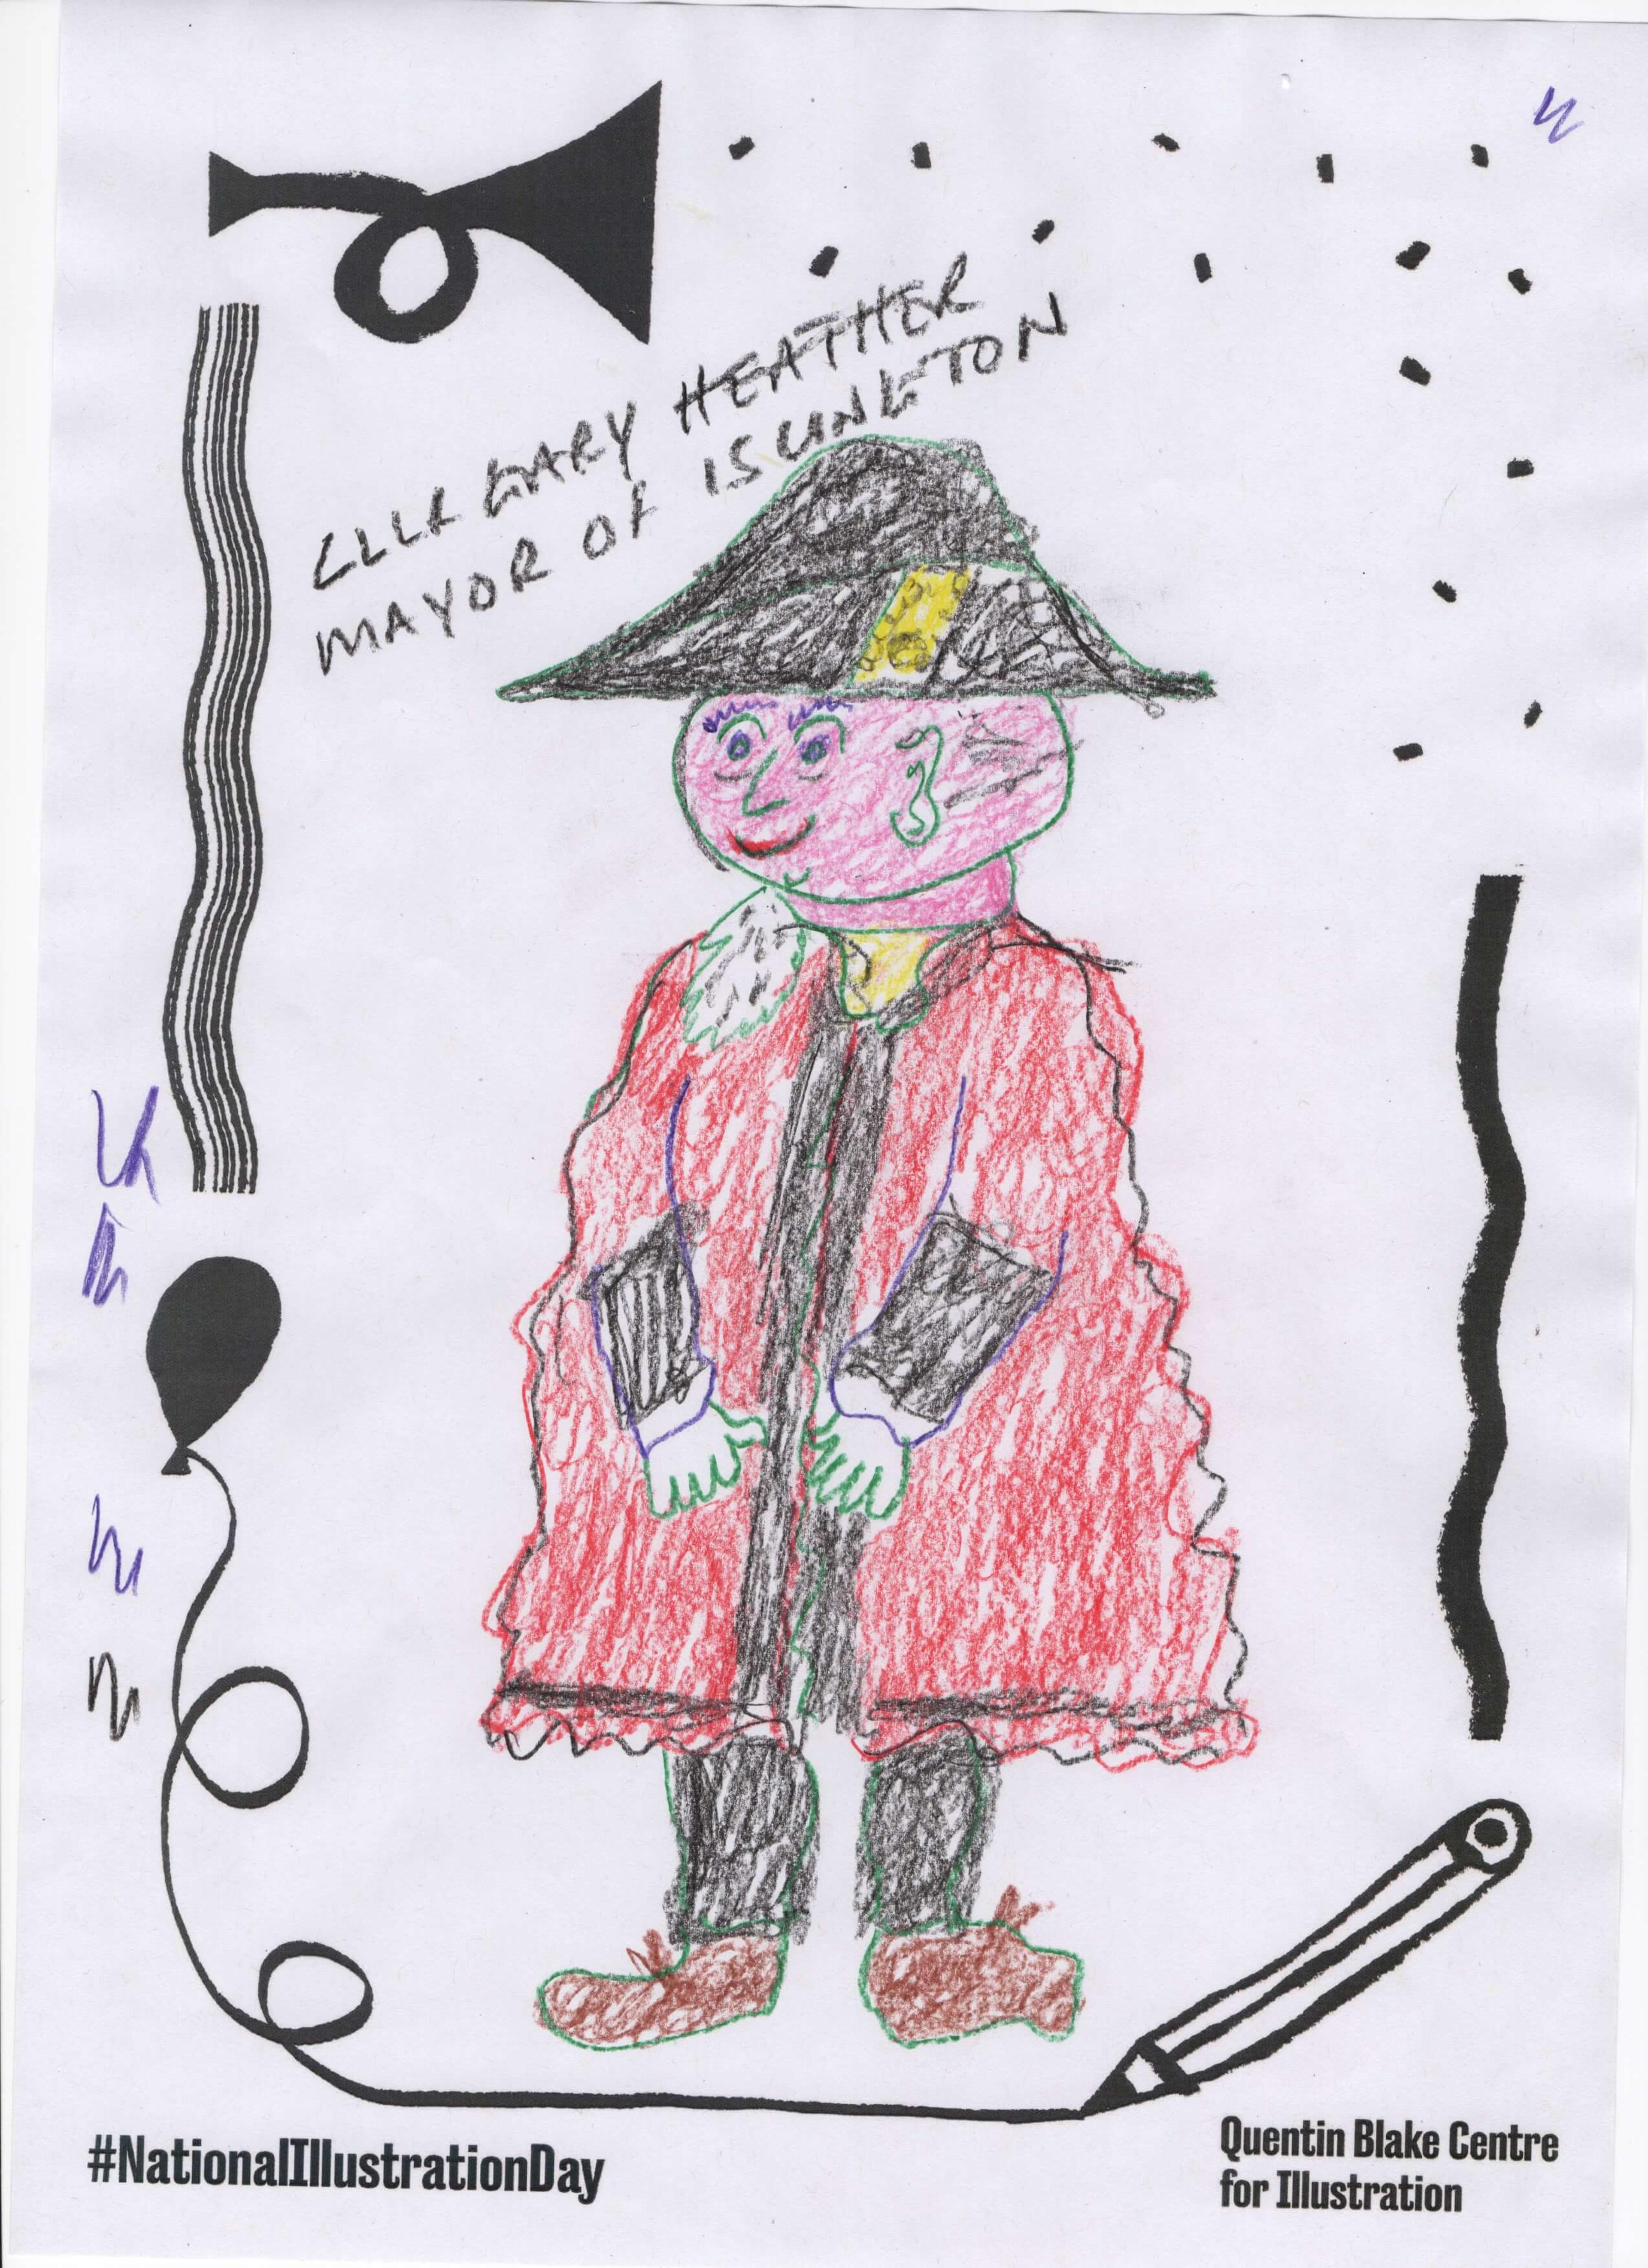 Cartoon drawing of a person wearing a big black hat and a red coat with the words "Cllr Gary Heather Mayor of Islington" noted above the figure. 